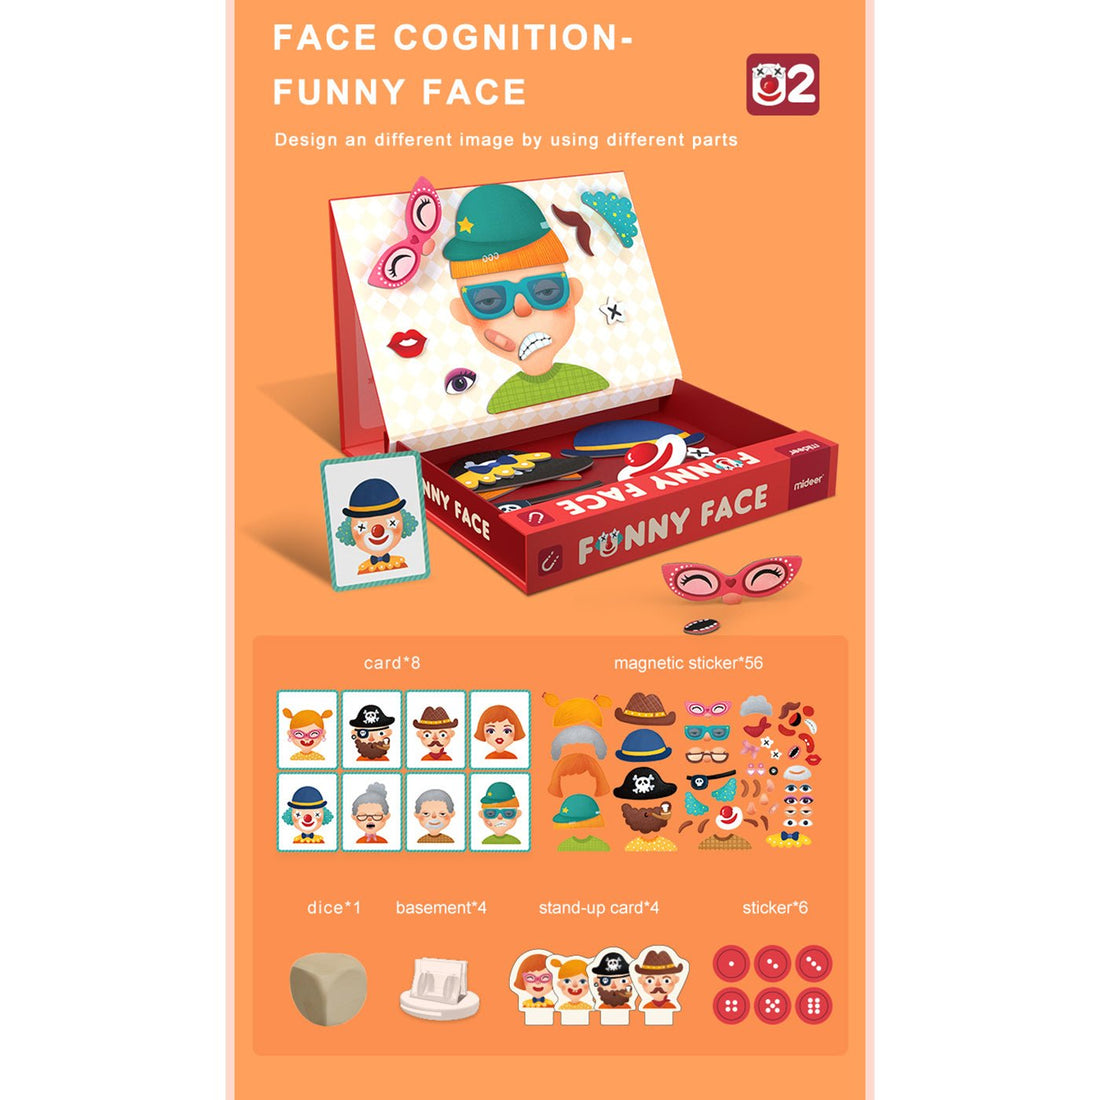 Funny Face Magenetic Playset - 0cm